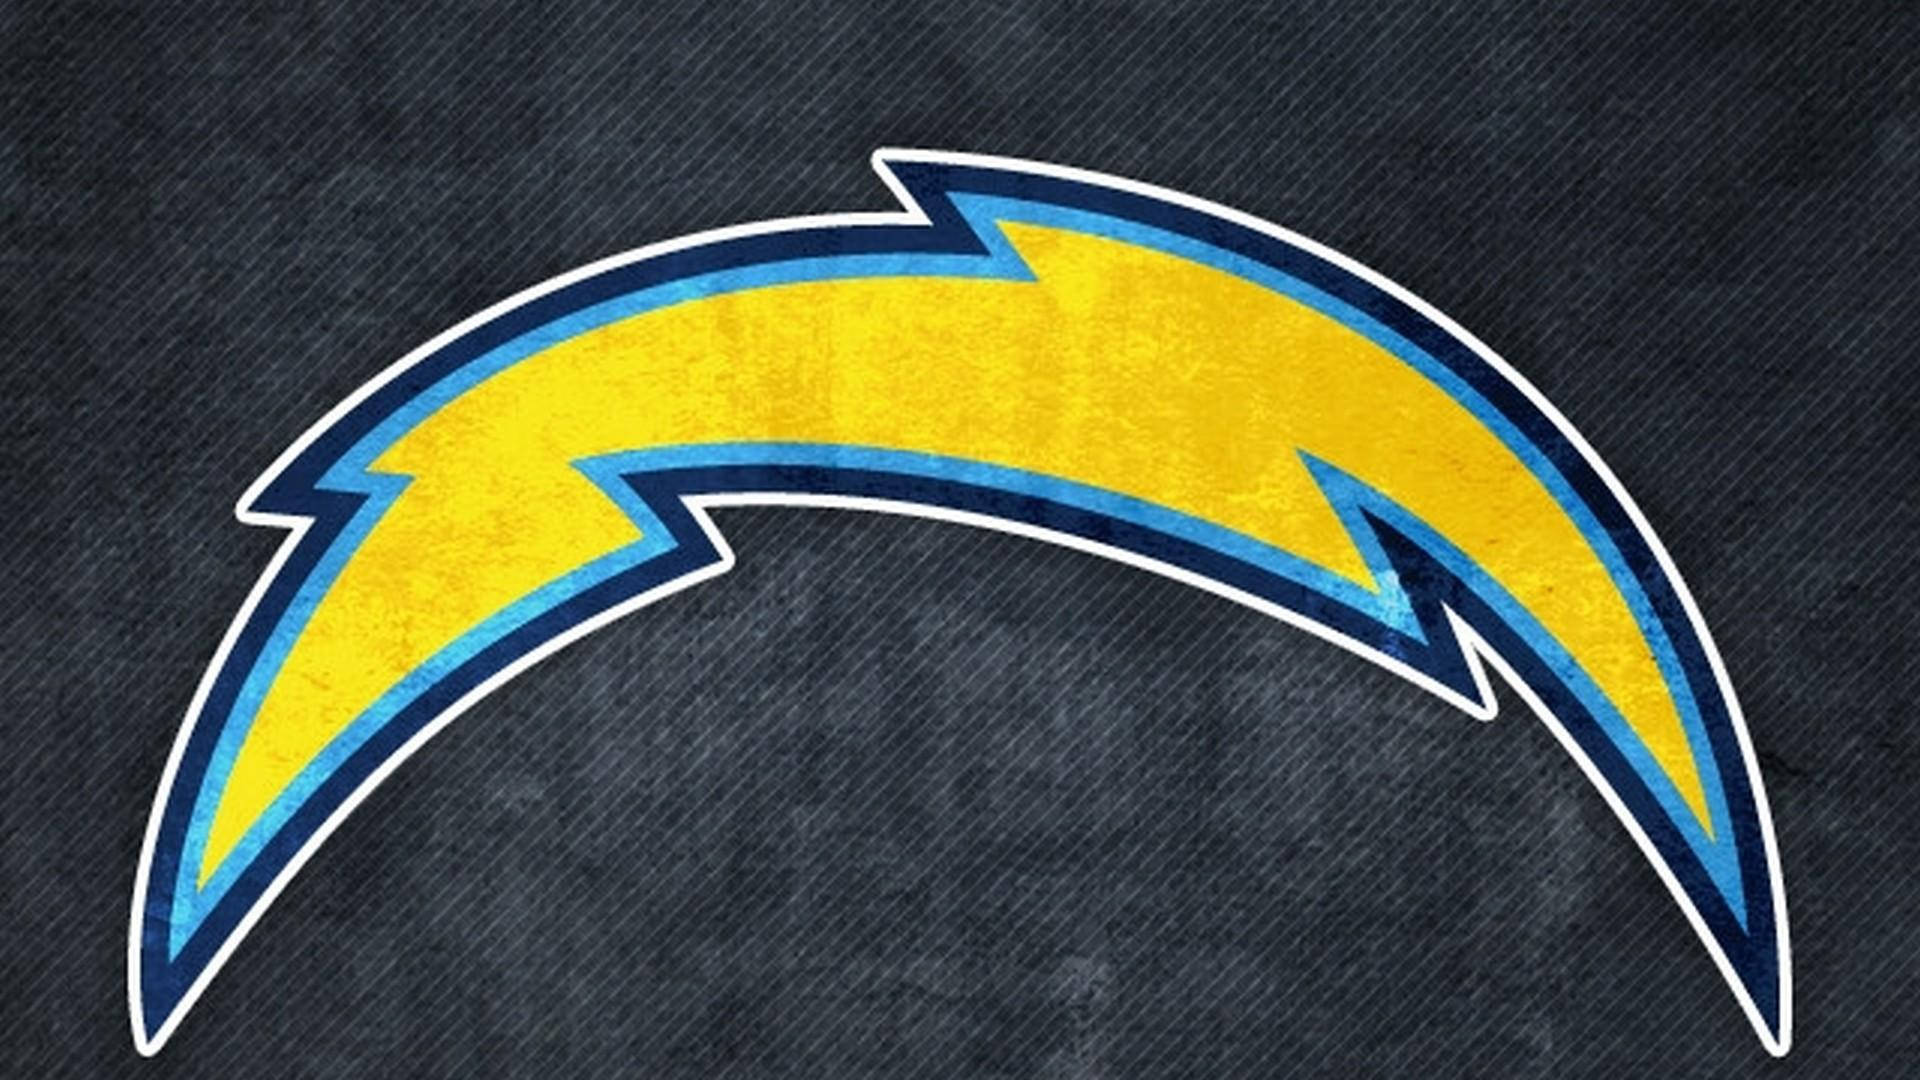 Top 999+ Los Angeles Chargers Wallpaper Full HD, 4K Free to Use